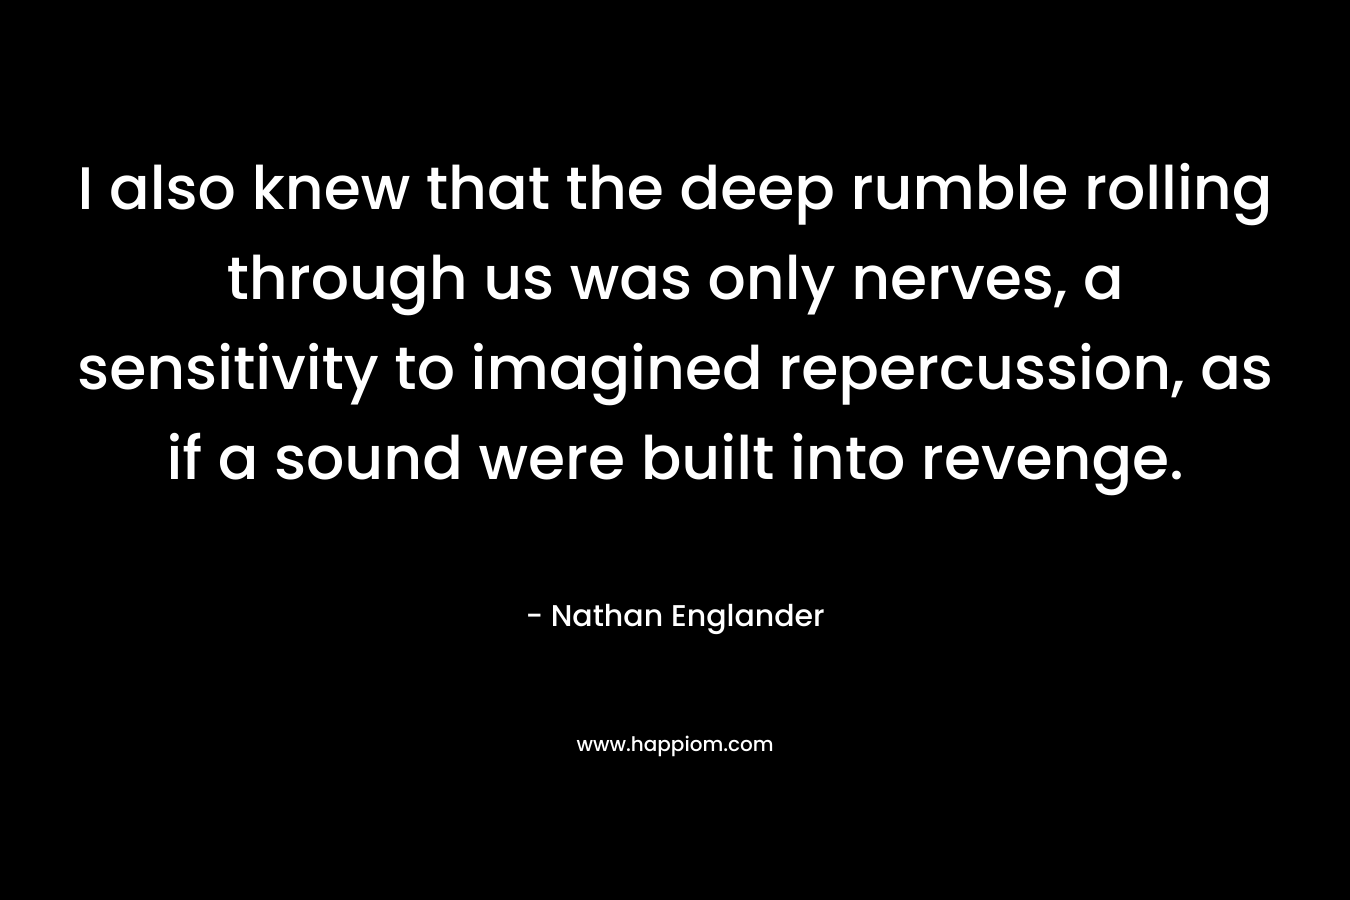 I also knew that the deep rumble rolling through us was only nerves, a sensitivity to imagined repercussion, as if a sound were built into revenge. – Nathan Englander